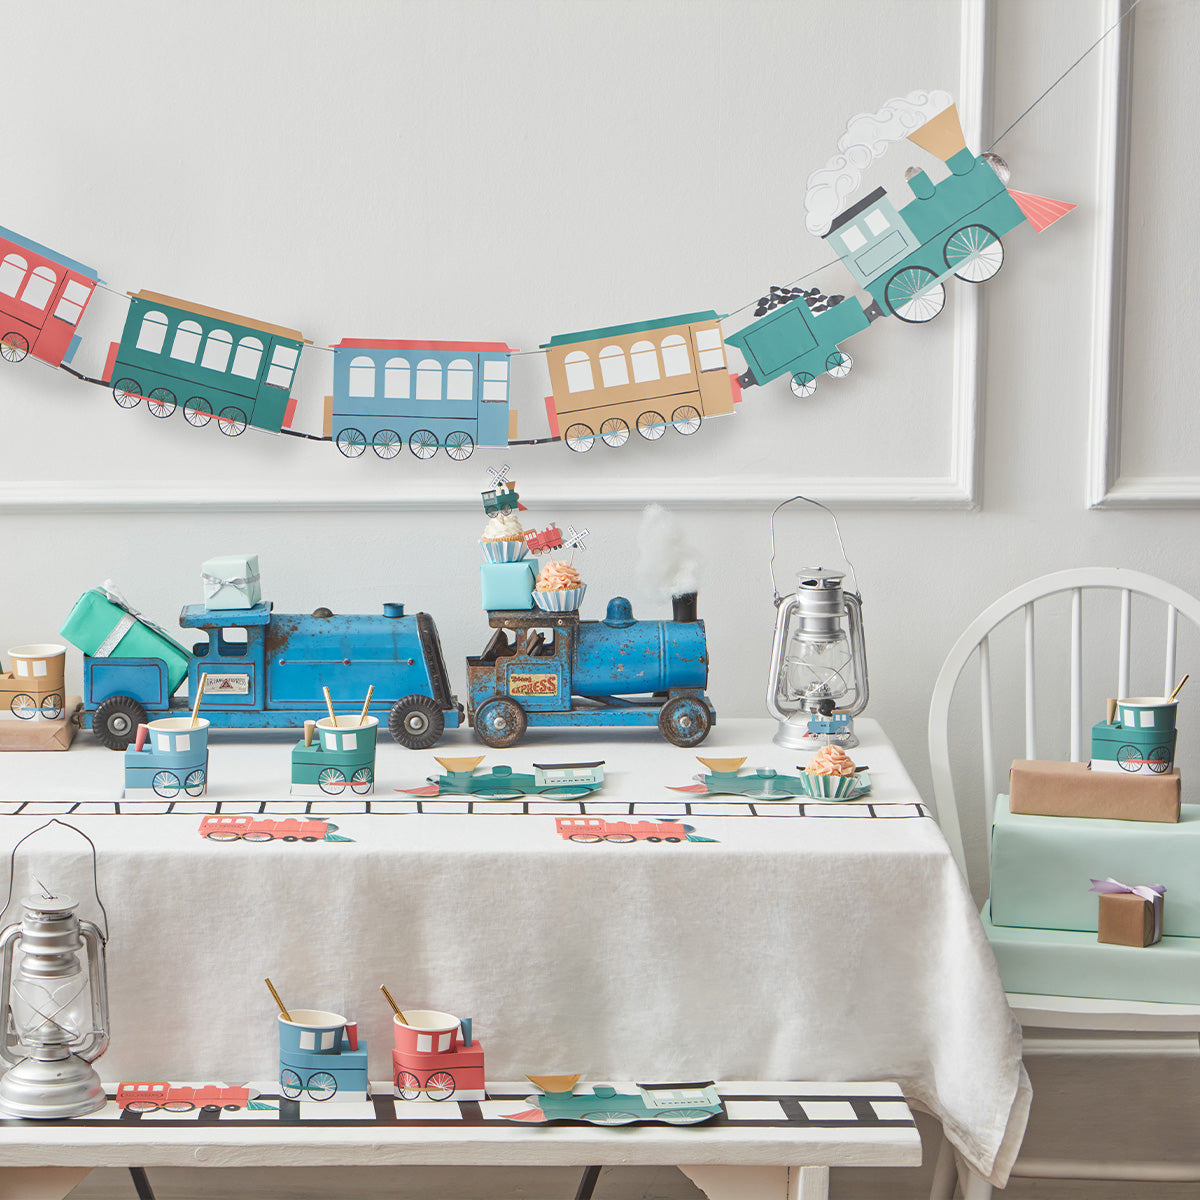 Our party plates, in the shape of trains, are the perfect kids plates for a train birthday party.